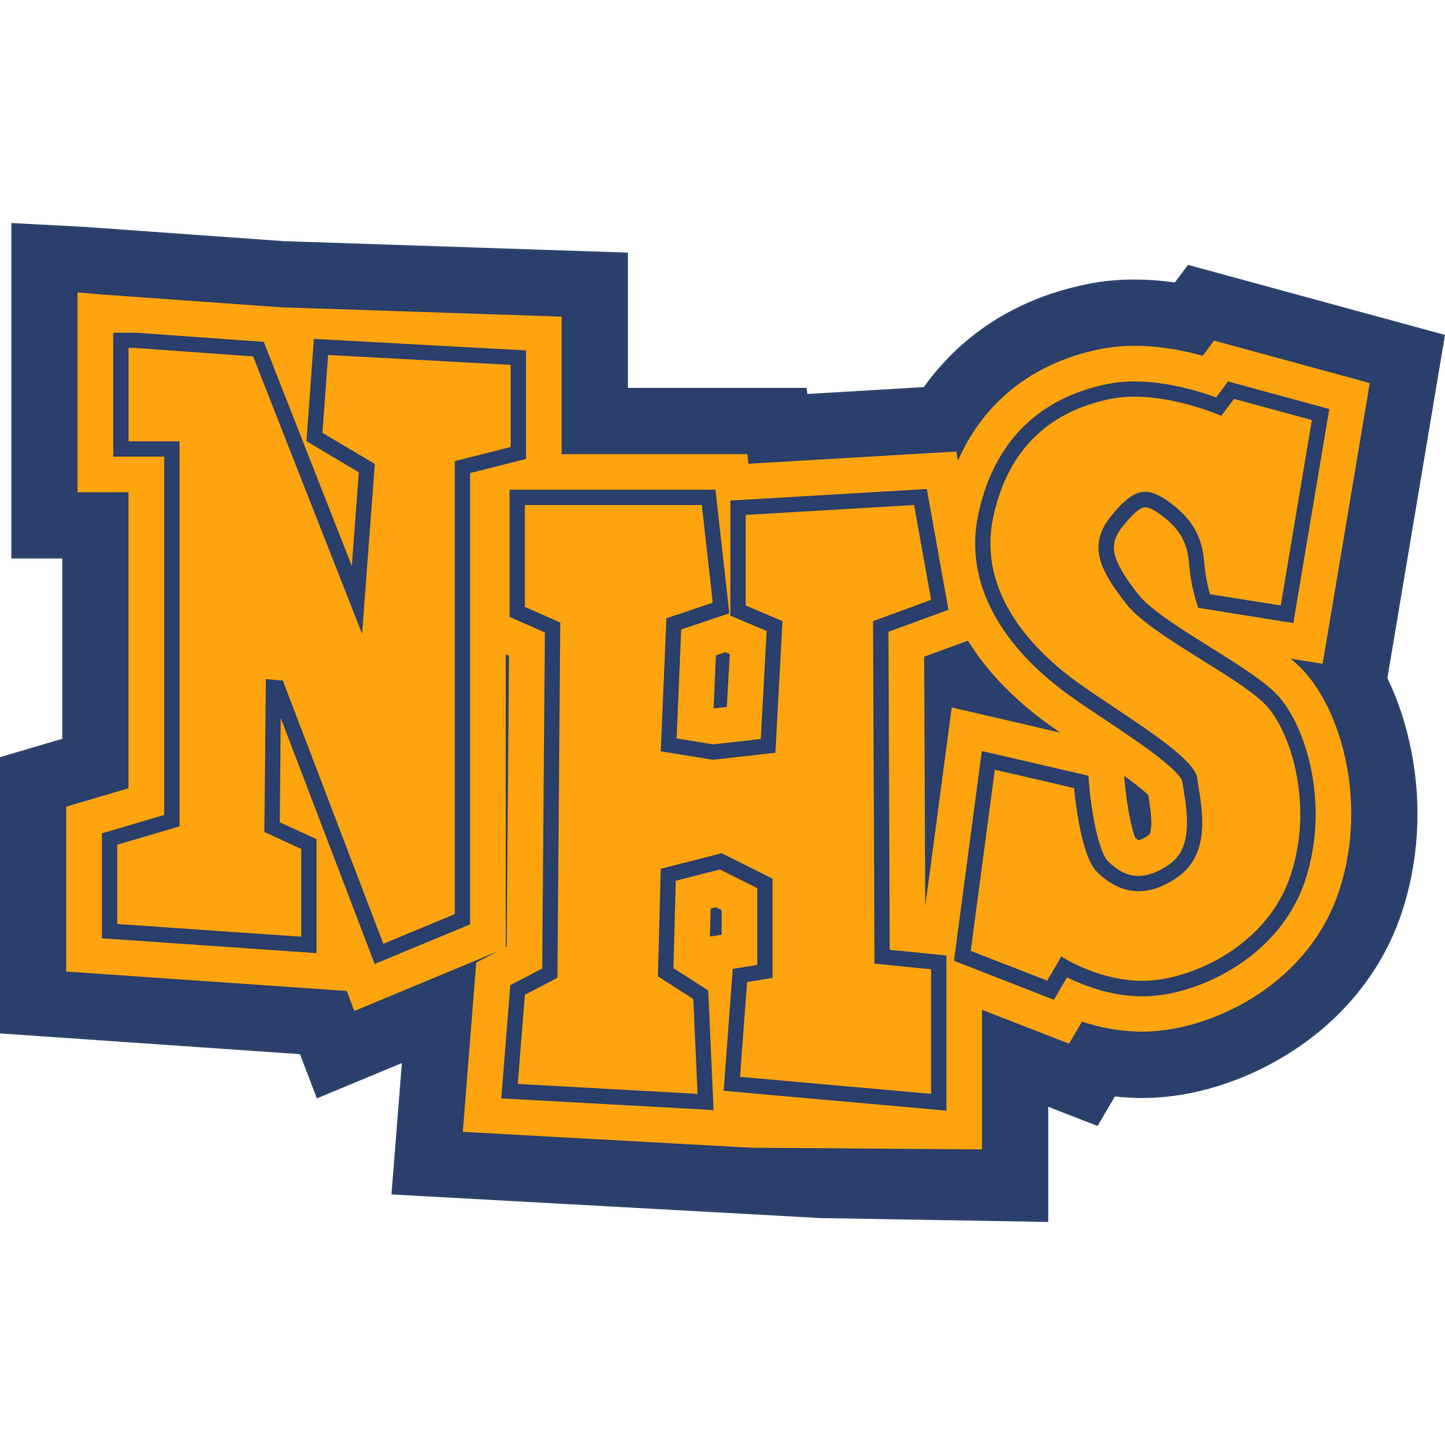 TNHS - NHS Sleeve Patch